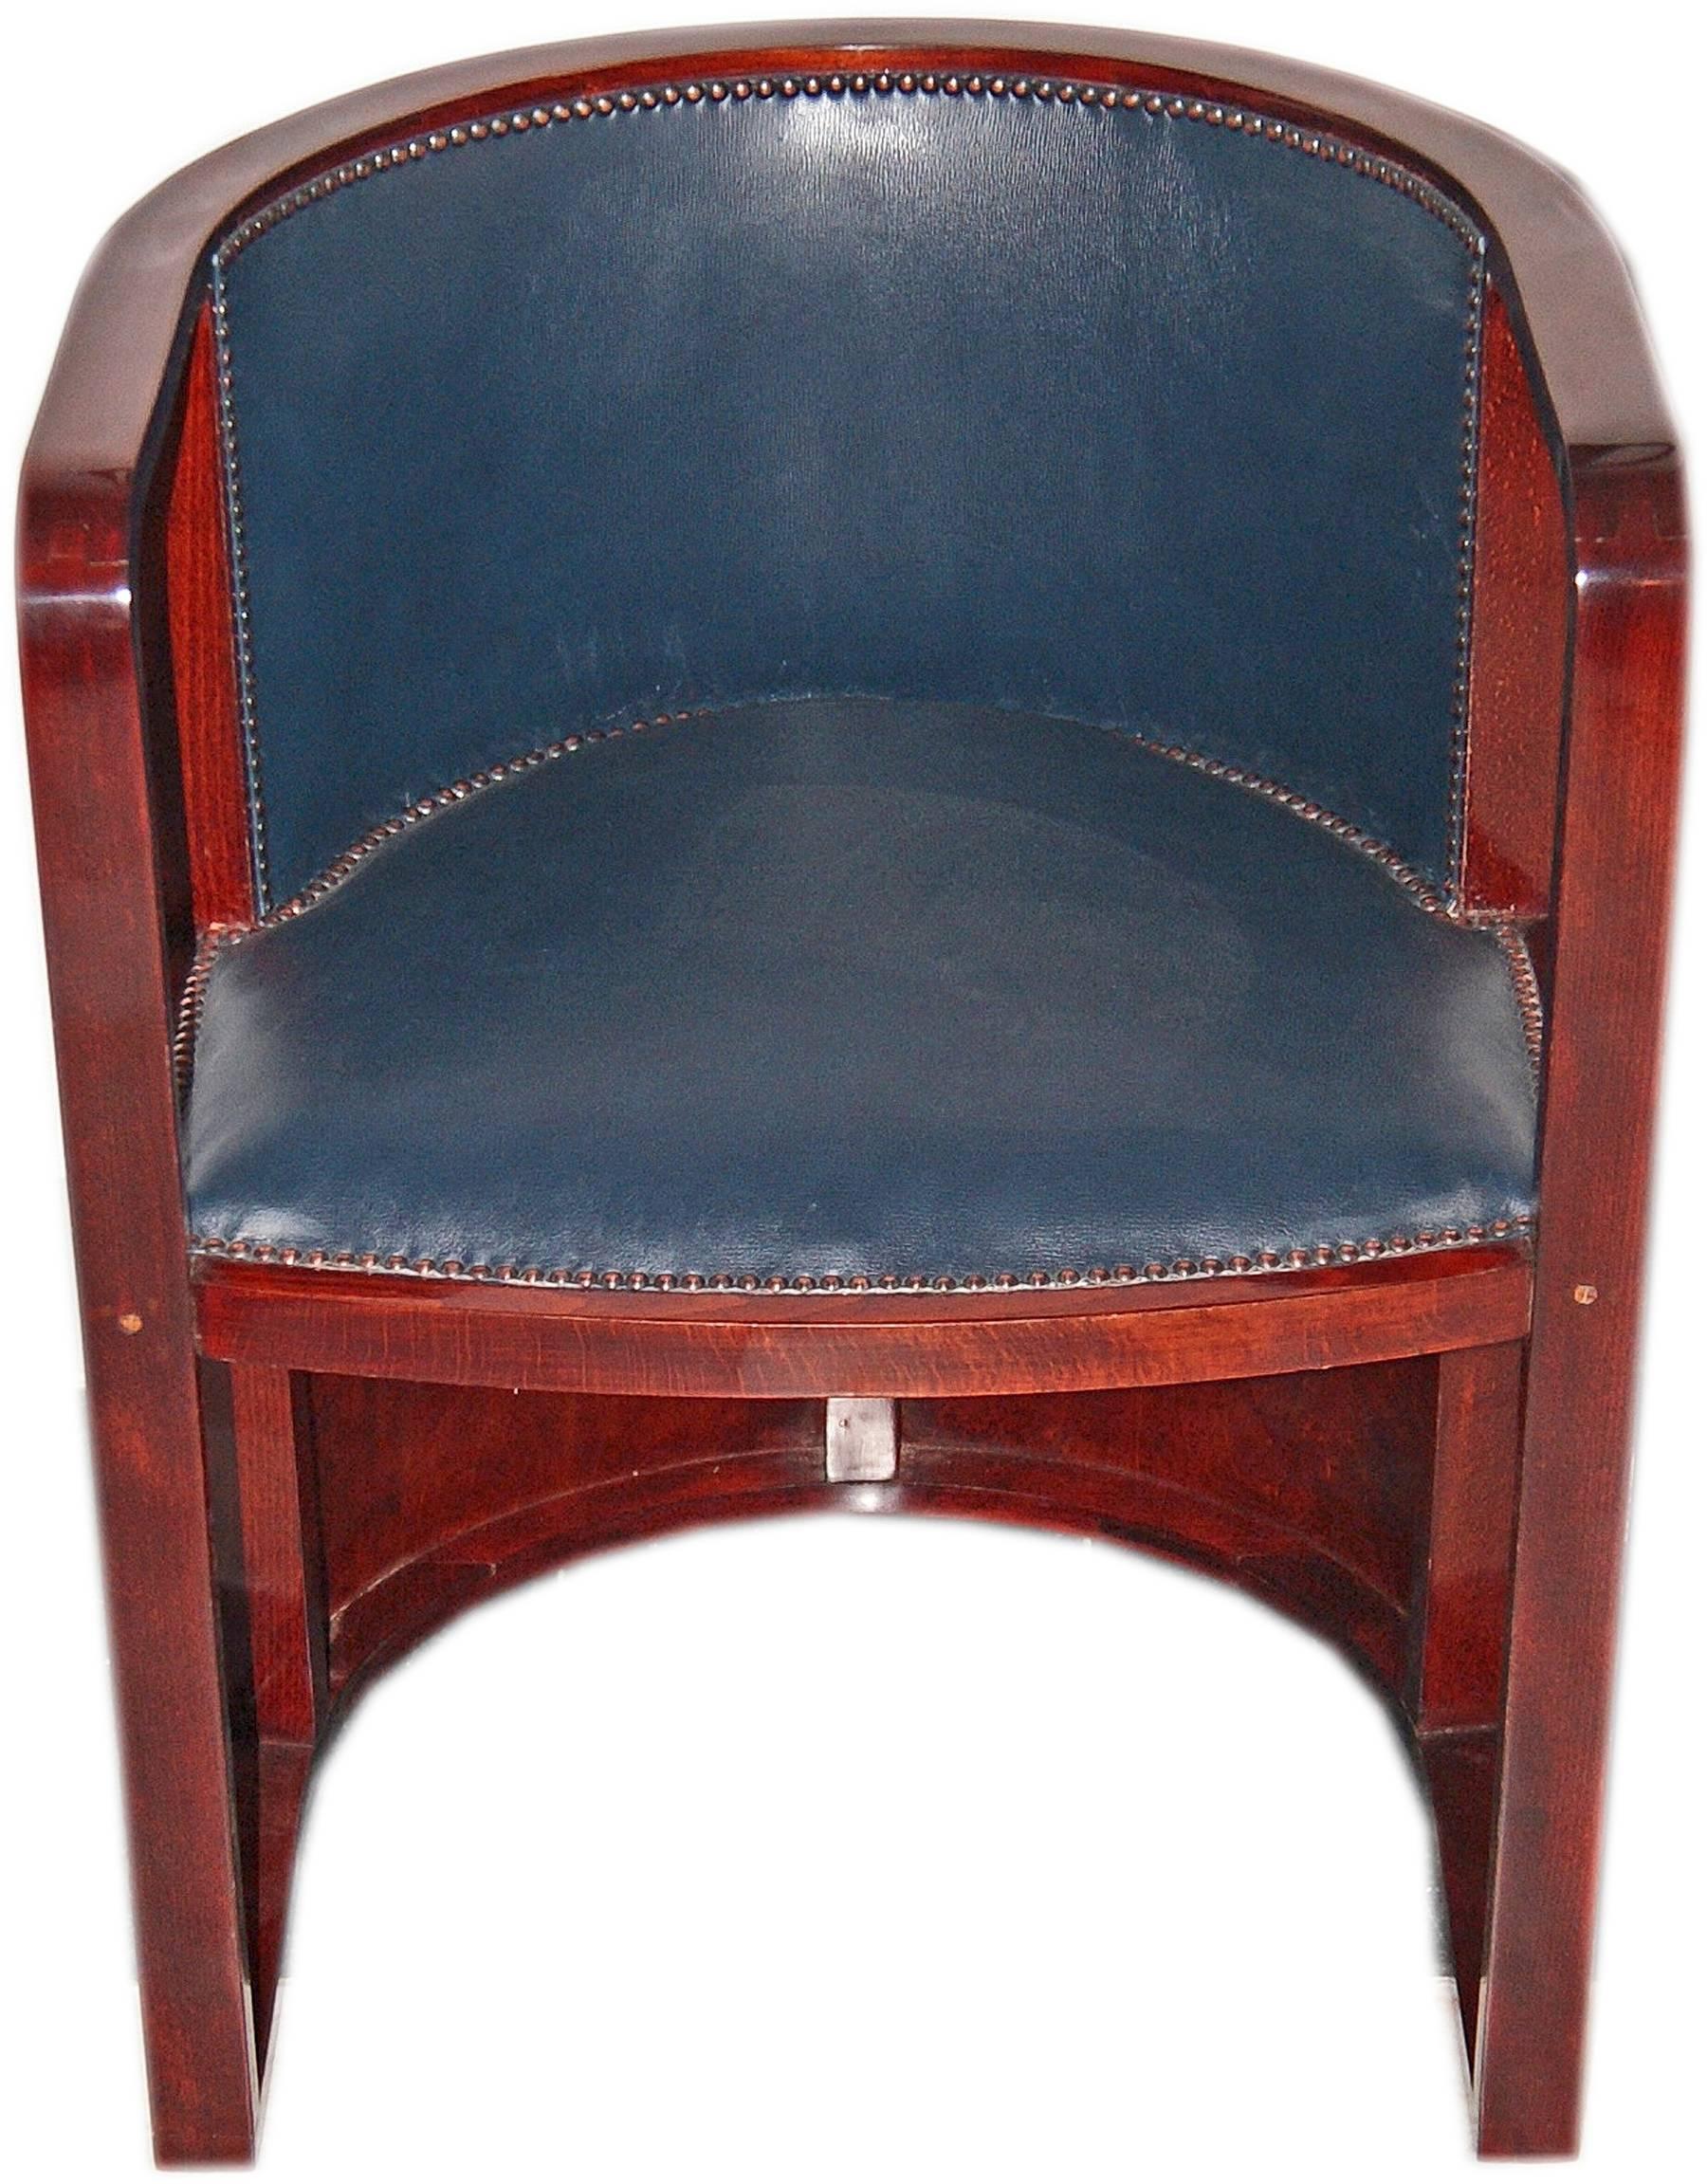 Jacob & Josef Kohn armchair (model 421)
Design: Josef Hoffmann 
Made in Vienna / Austria, Art Nouveau Period.
beechwood massive 
mahogany stained 
seat and backrest are covered with green leather 
made, circa 1910-1920

This model was